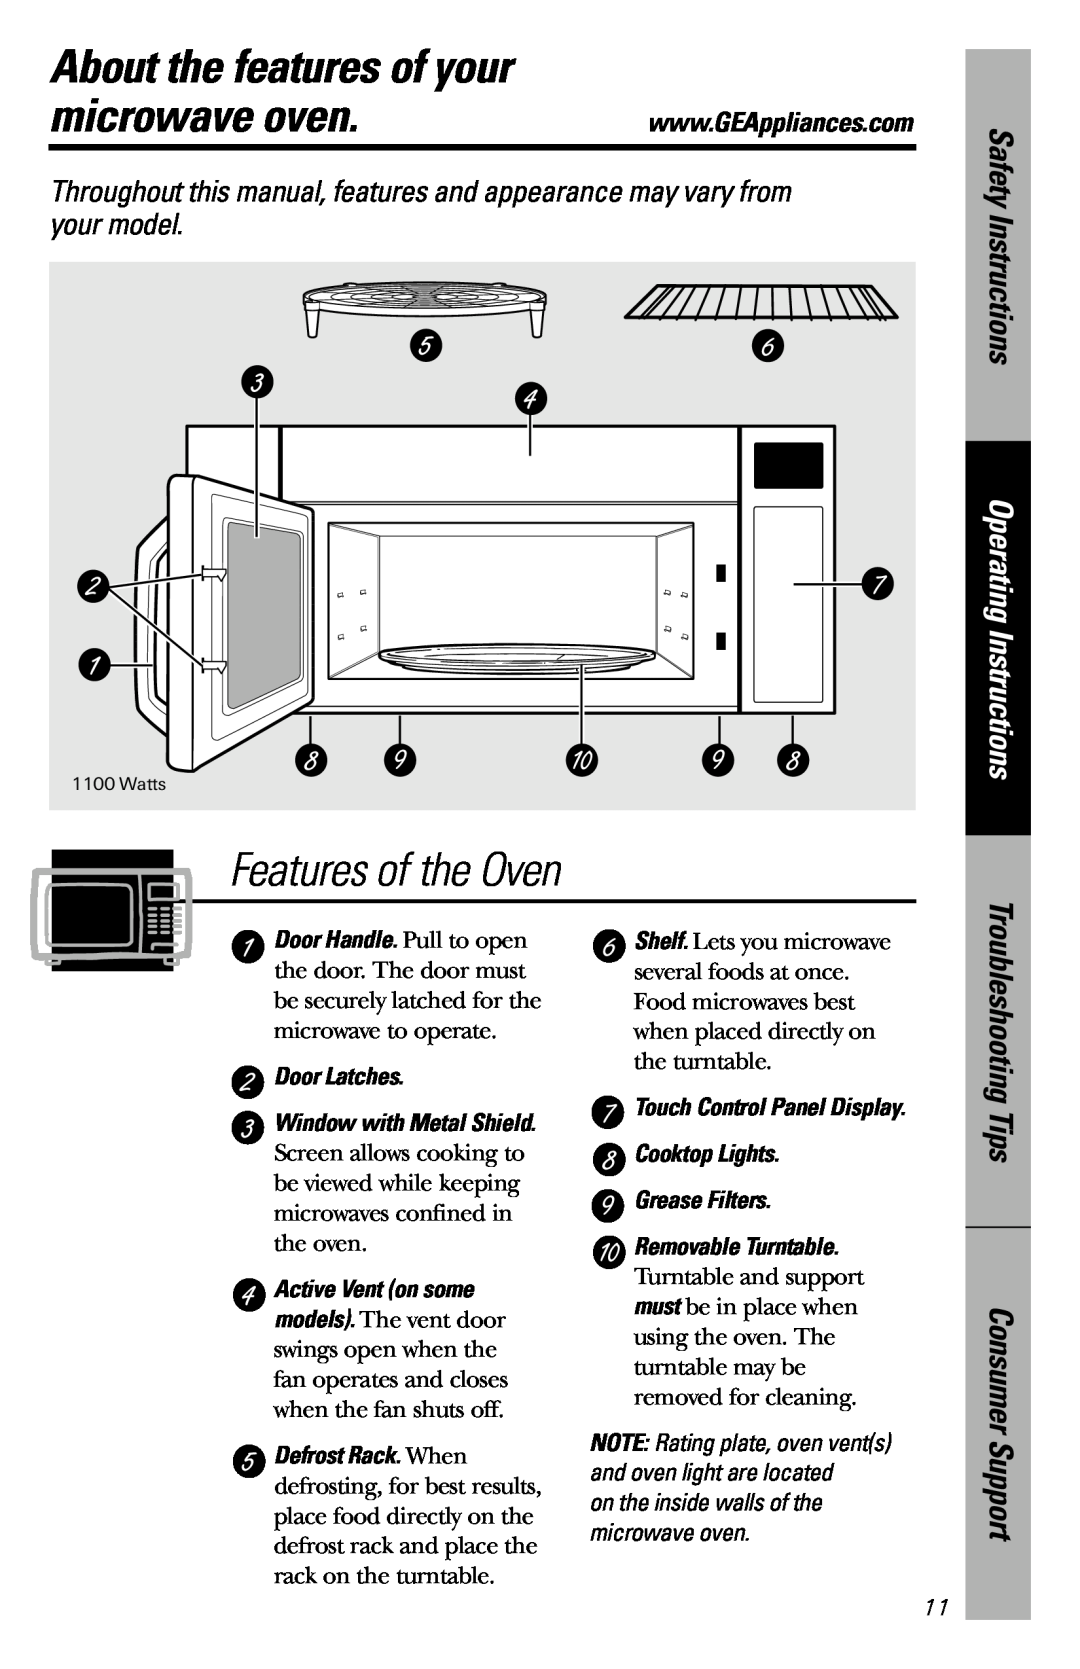 GE JVM3660BD About the features of your, microwave oven, Features of the Oven, Safety Instructions, Operating Instructions 